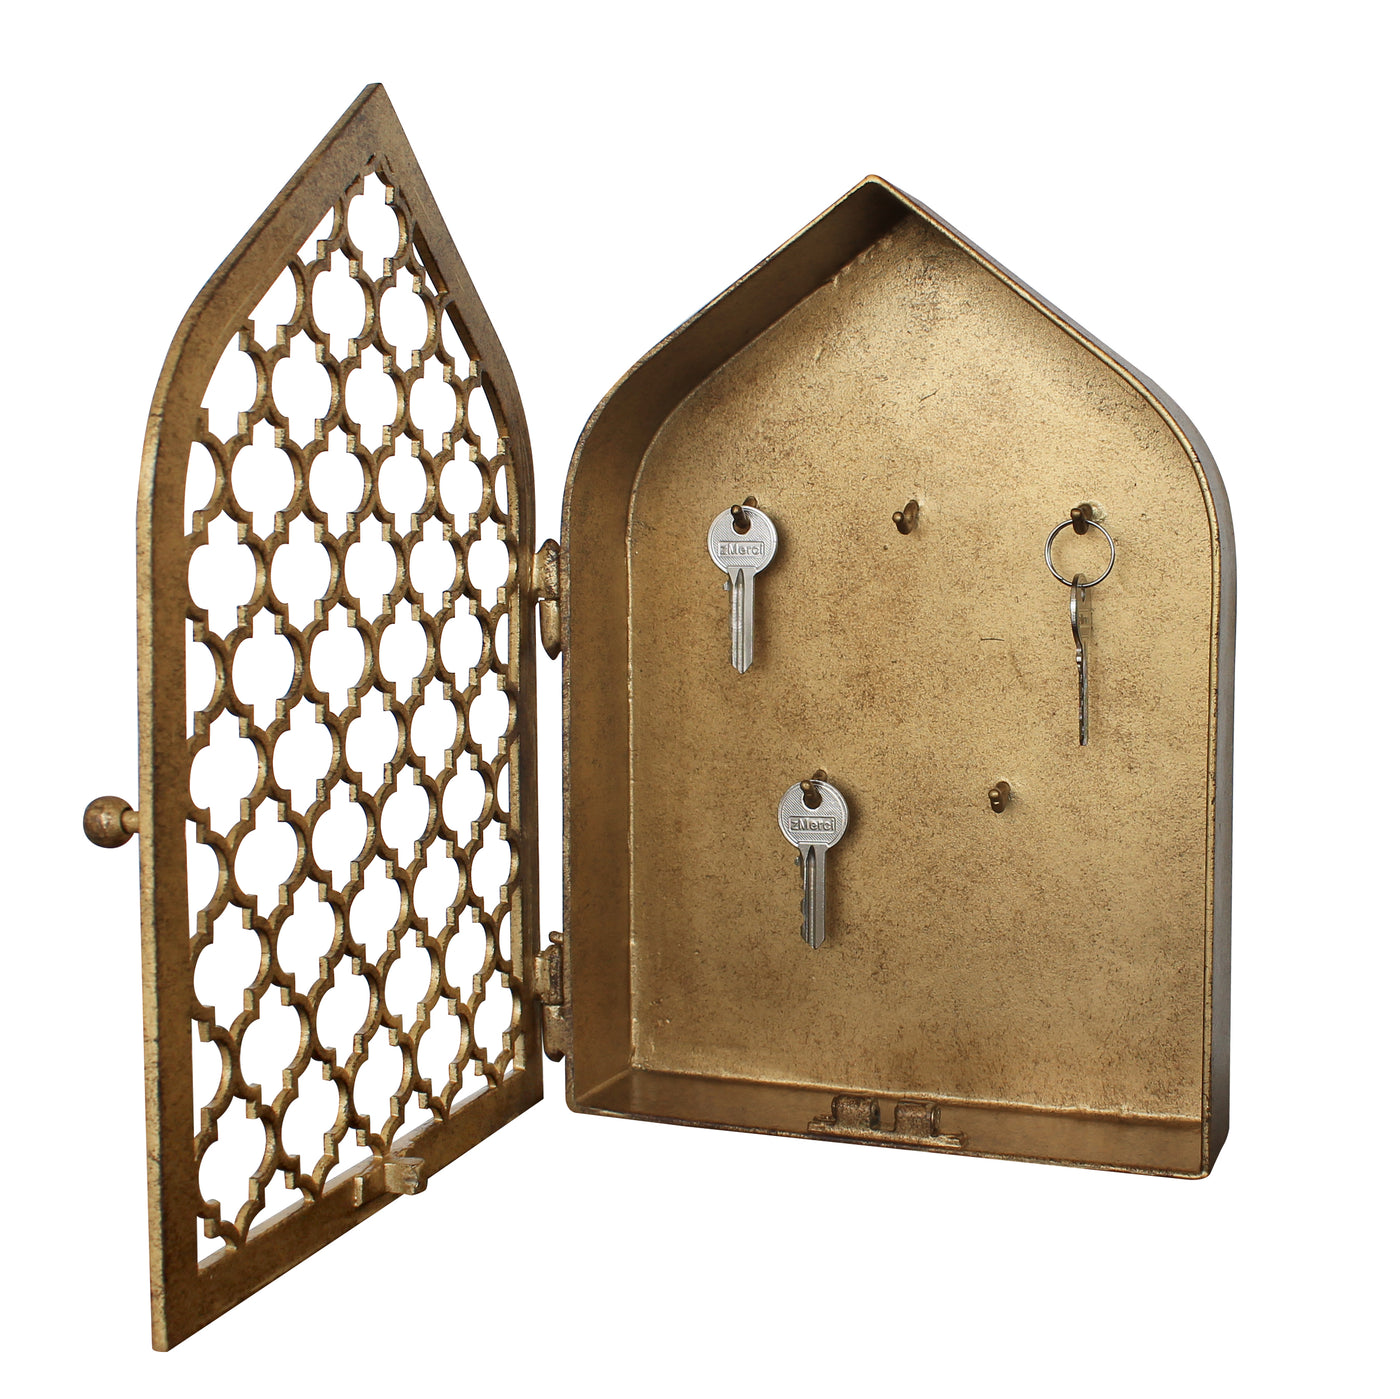 Frontal view of an opened key box with a geometric pattern and pointed arched top painted in an antique gold finish